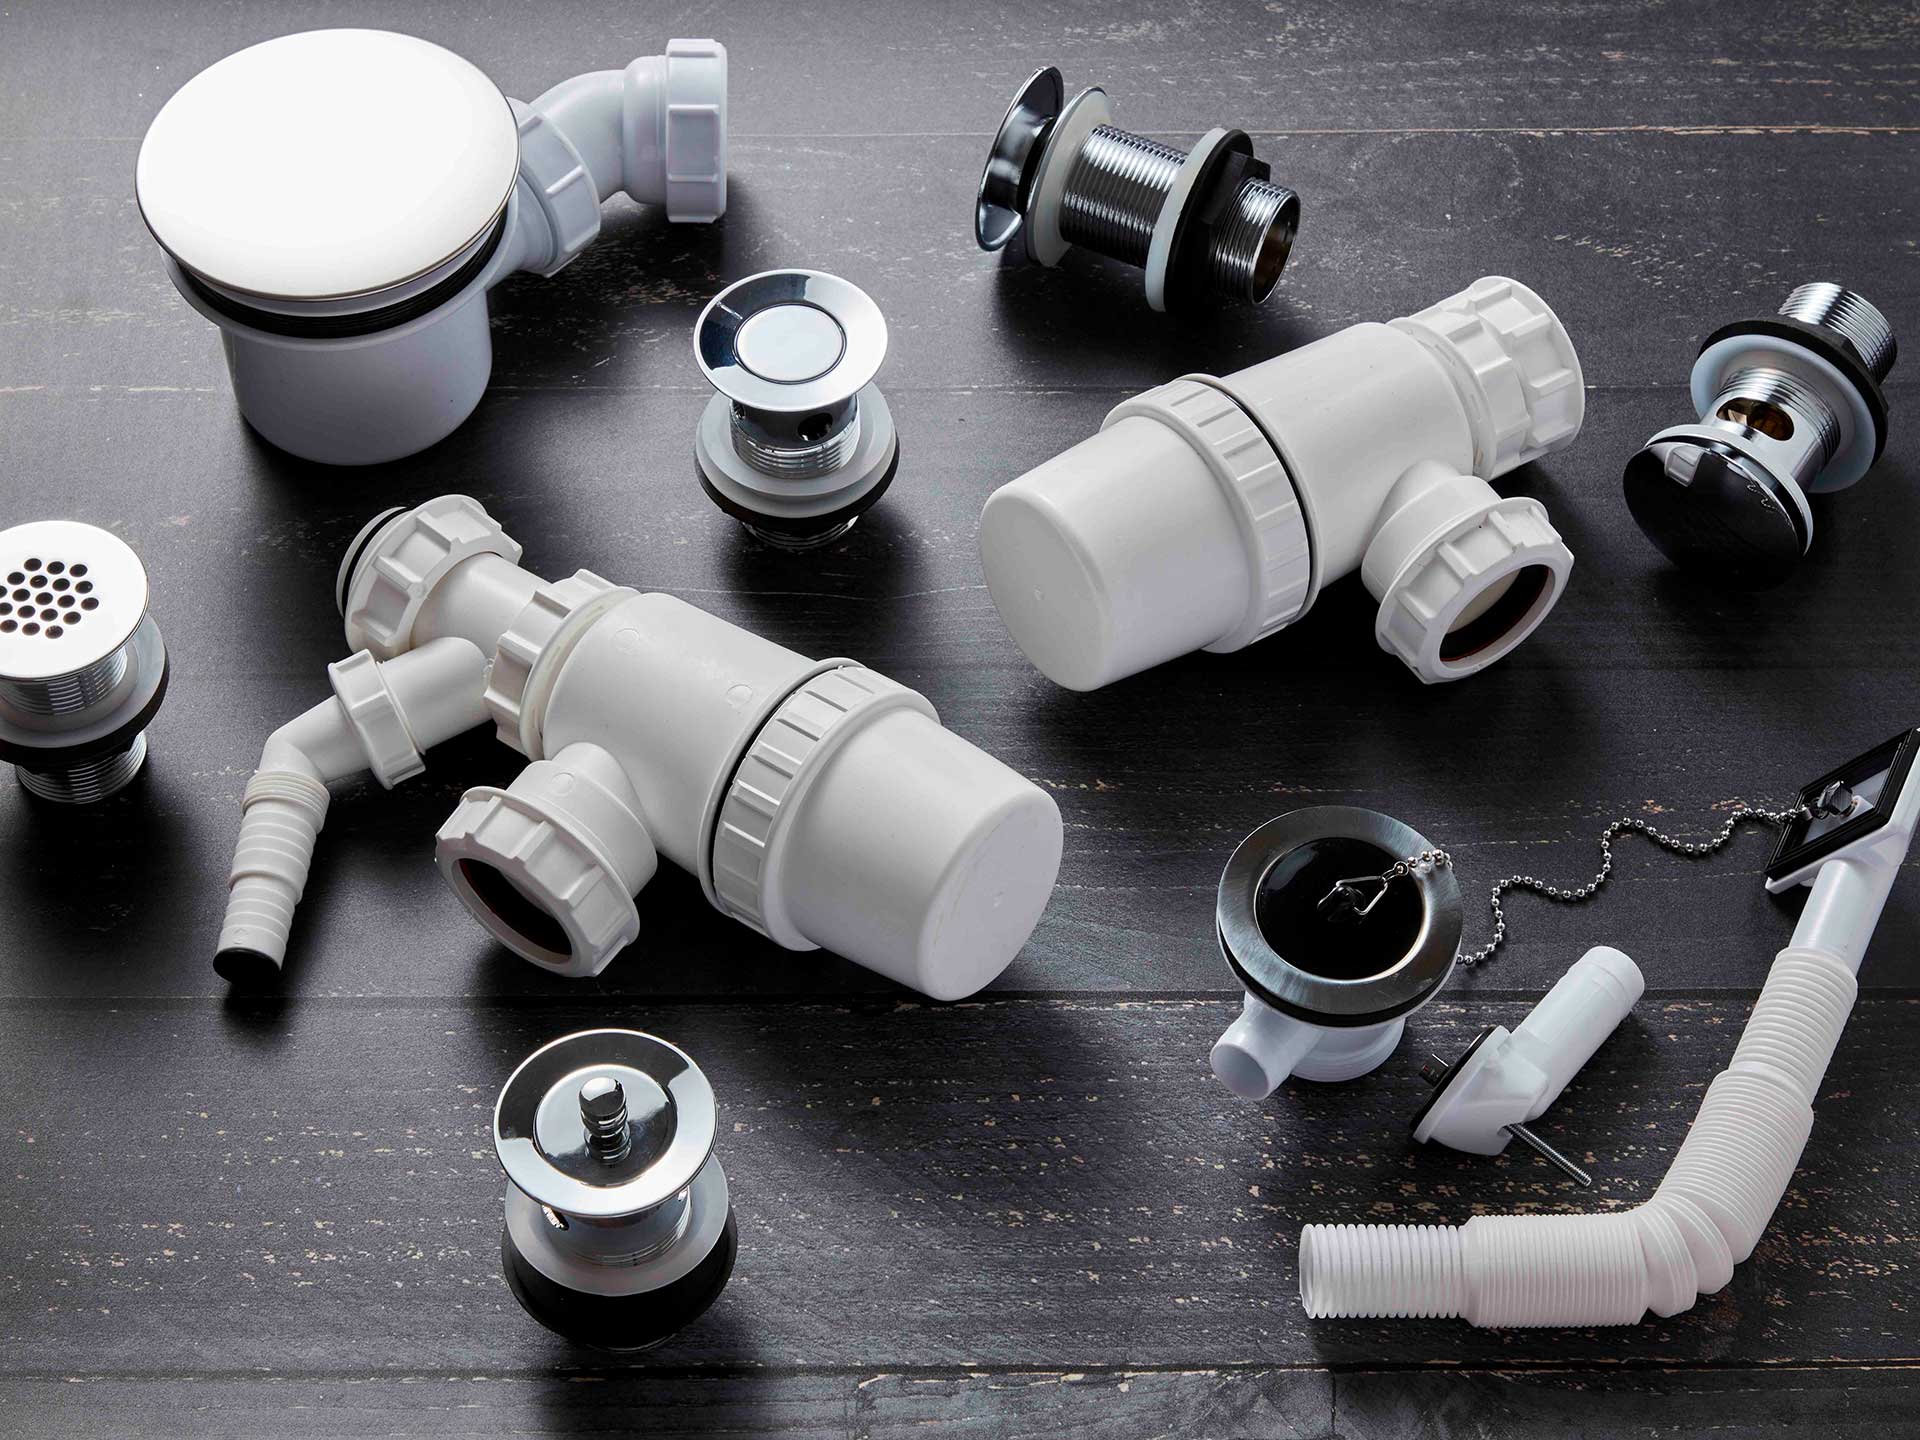 Flomaster has a full range of plumbing products